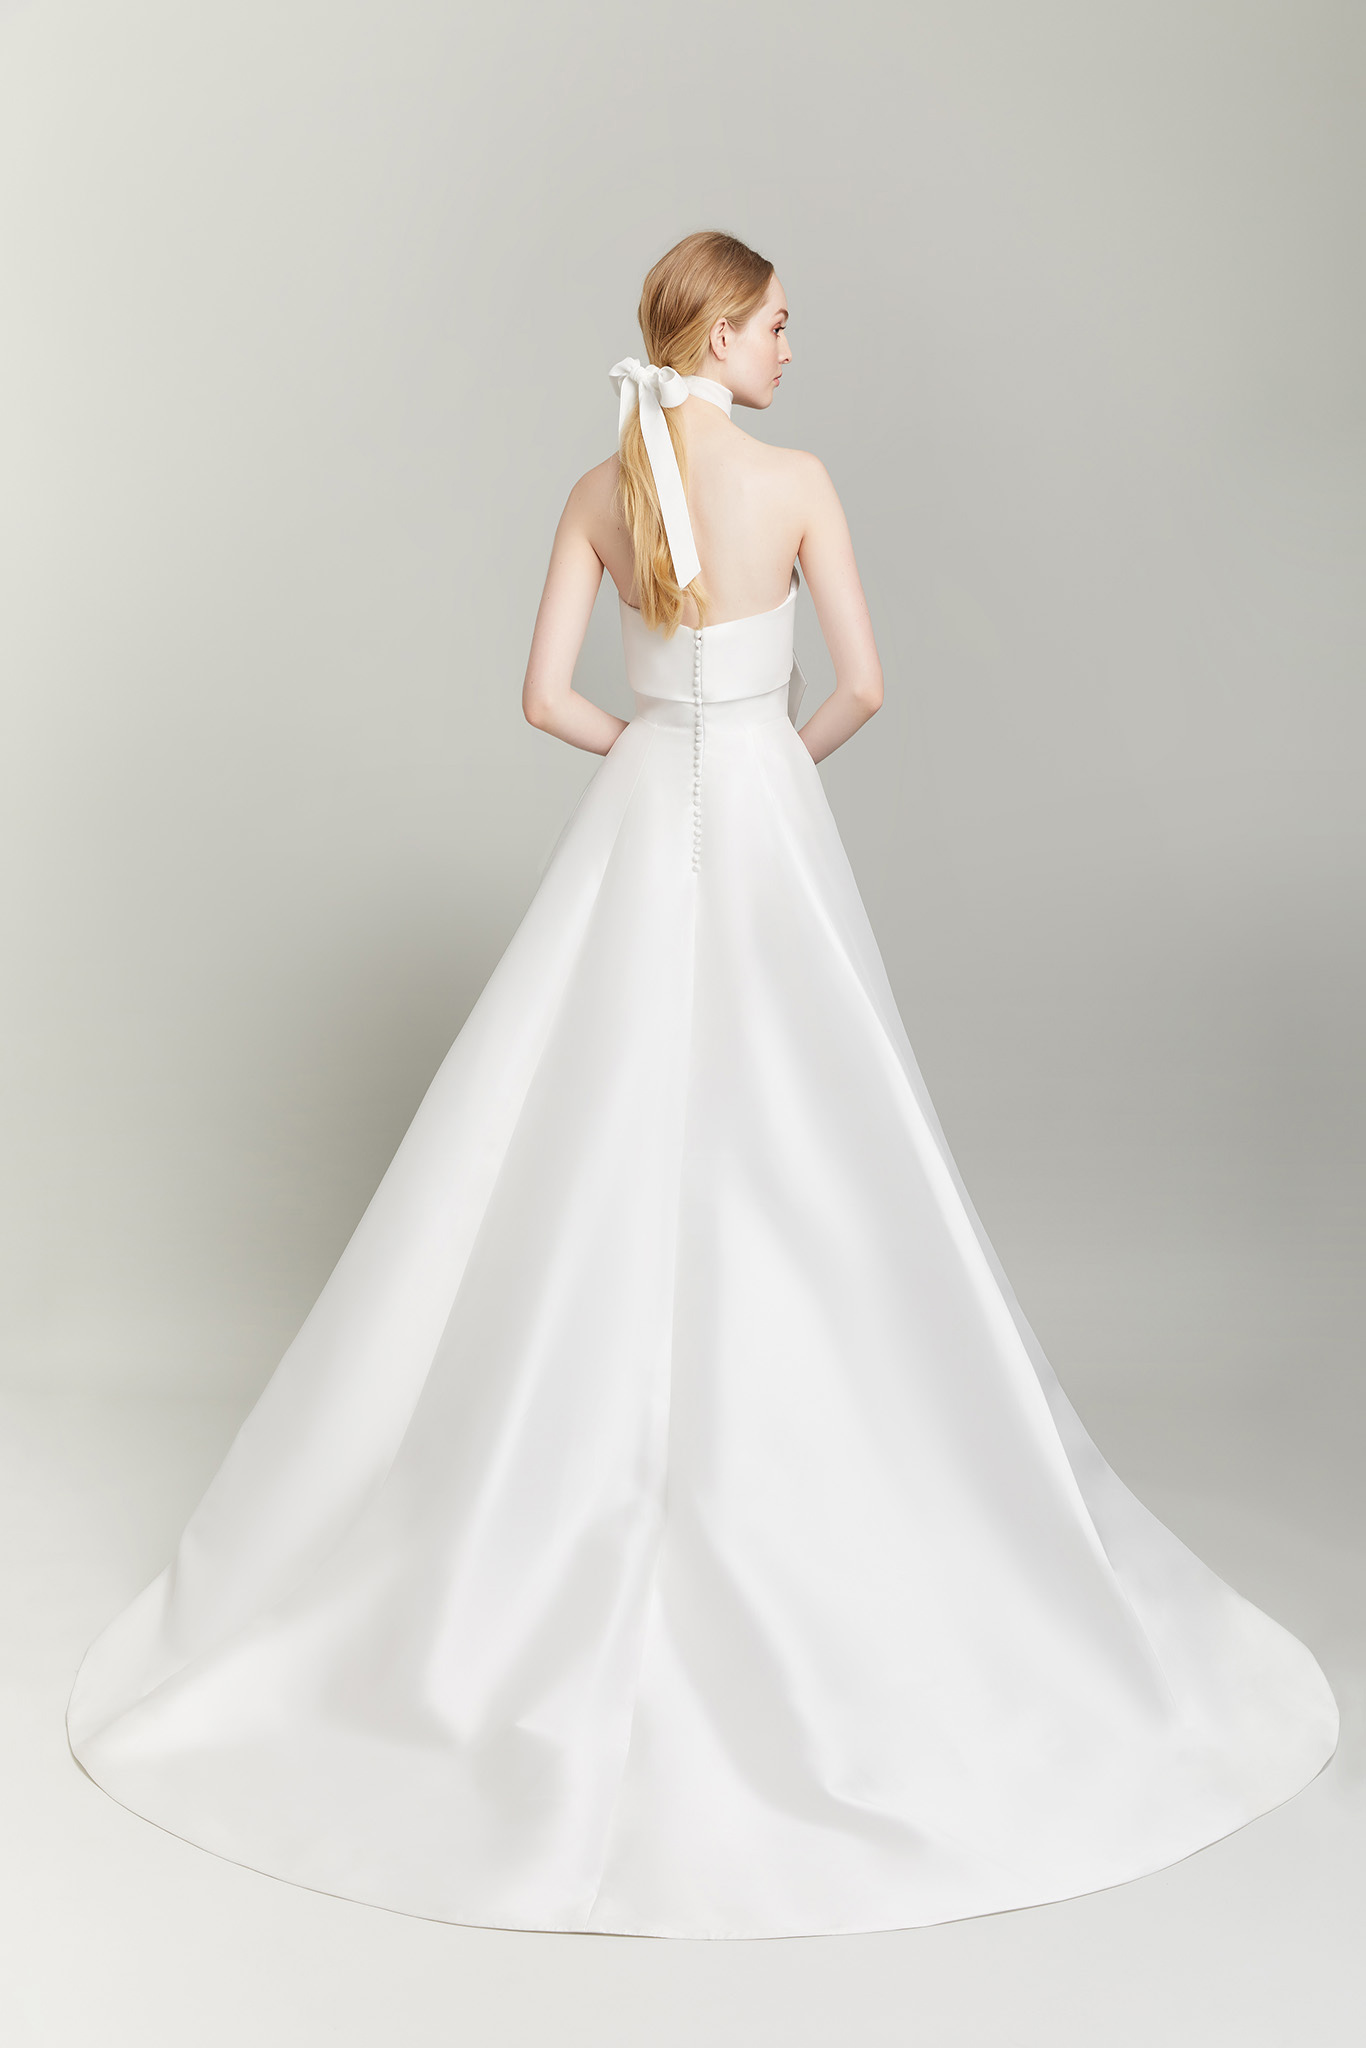 Lela Rose A-Line gown with bow bodice